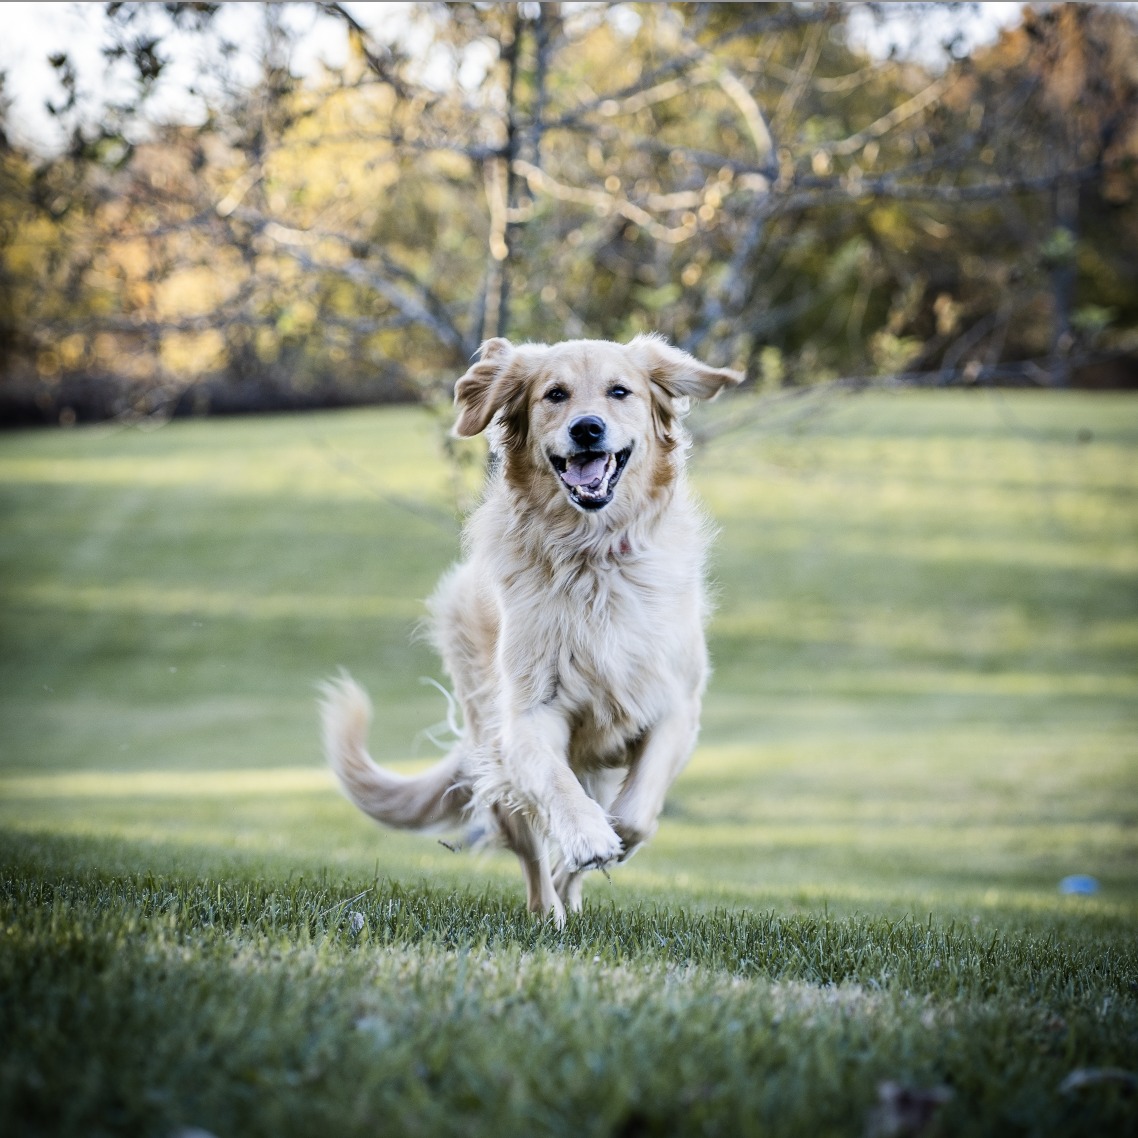 Golden retriever running with its rongue out towards you